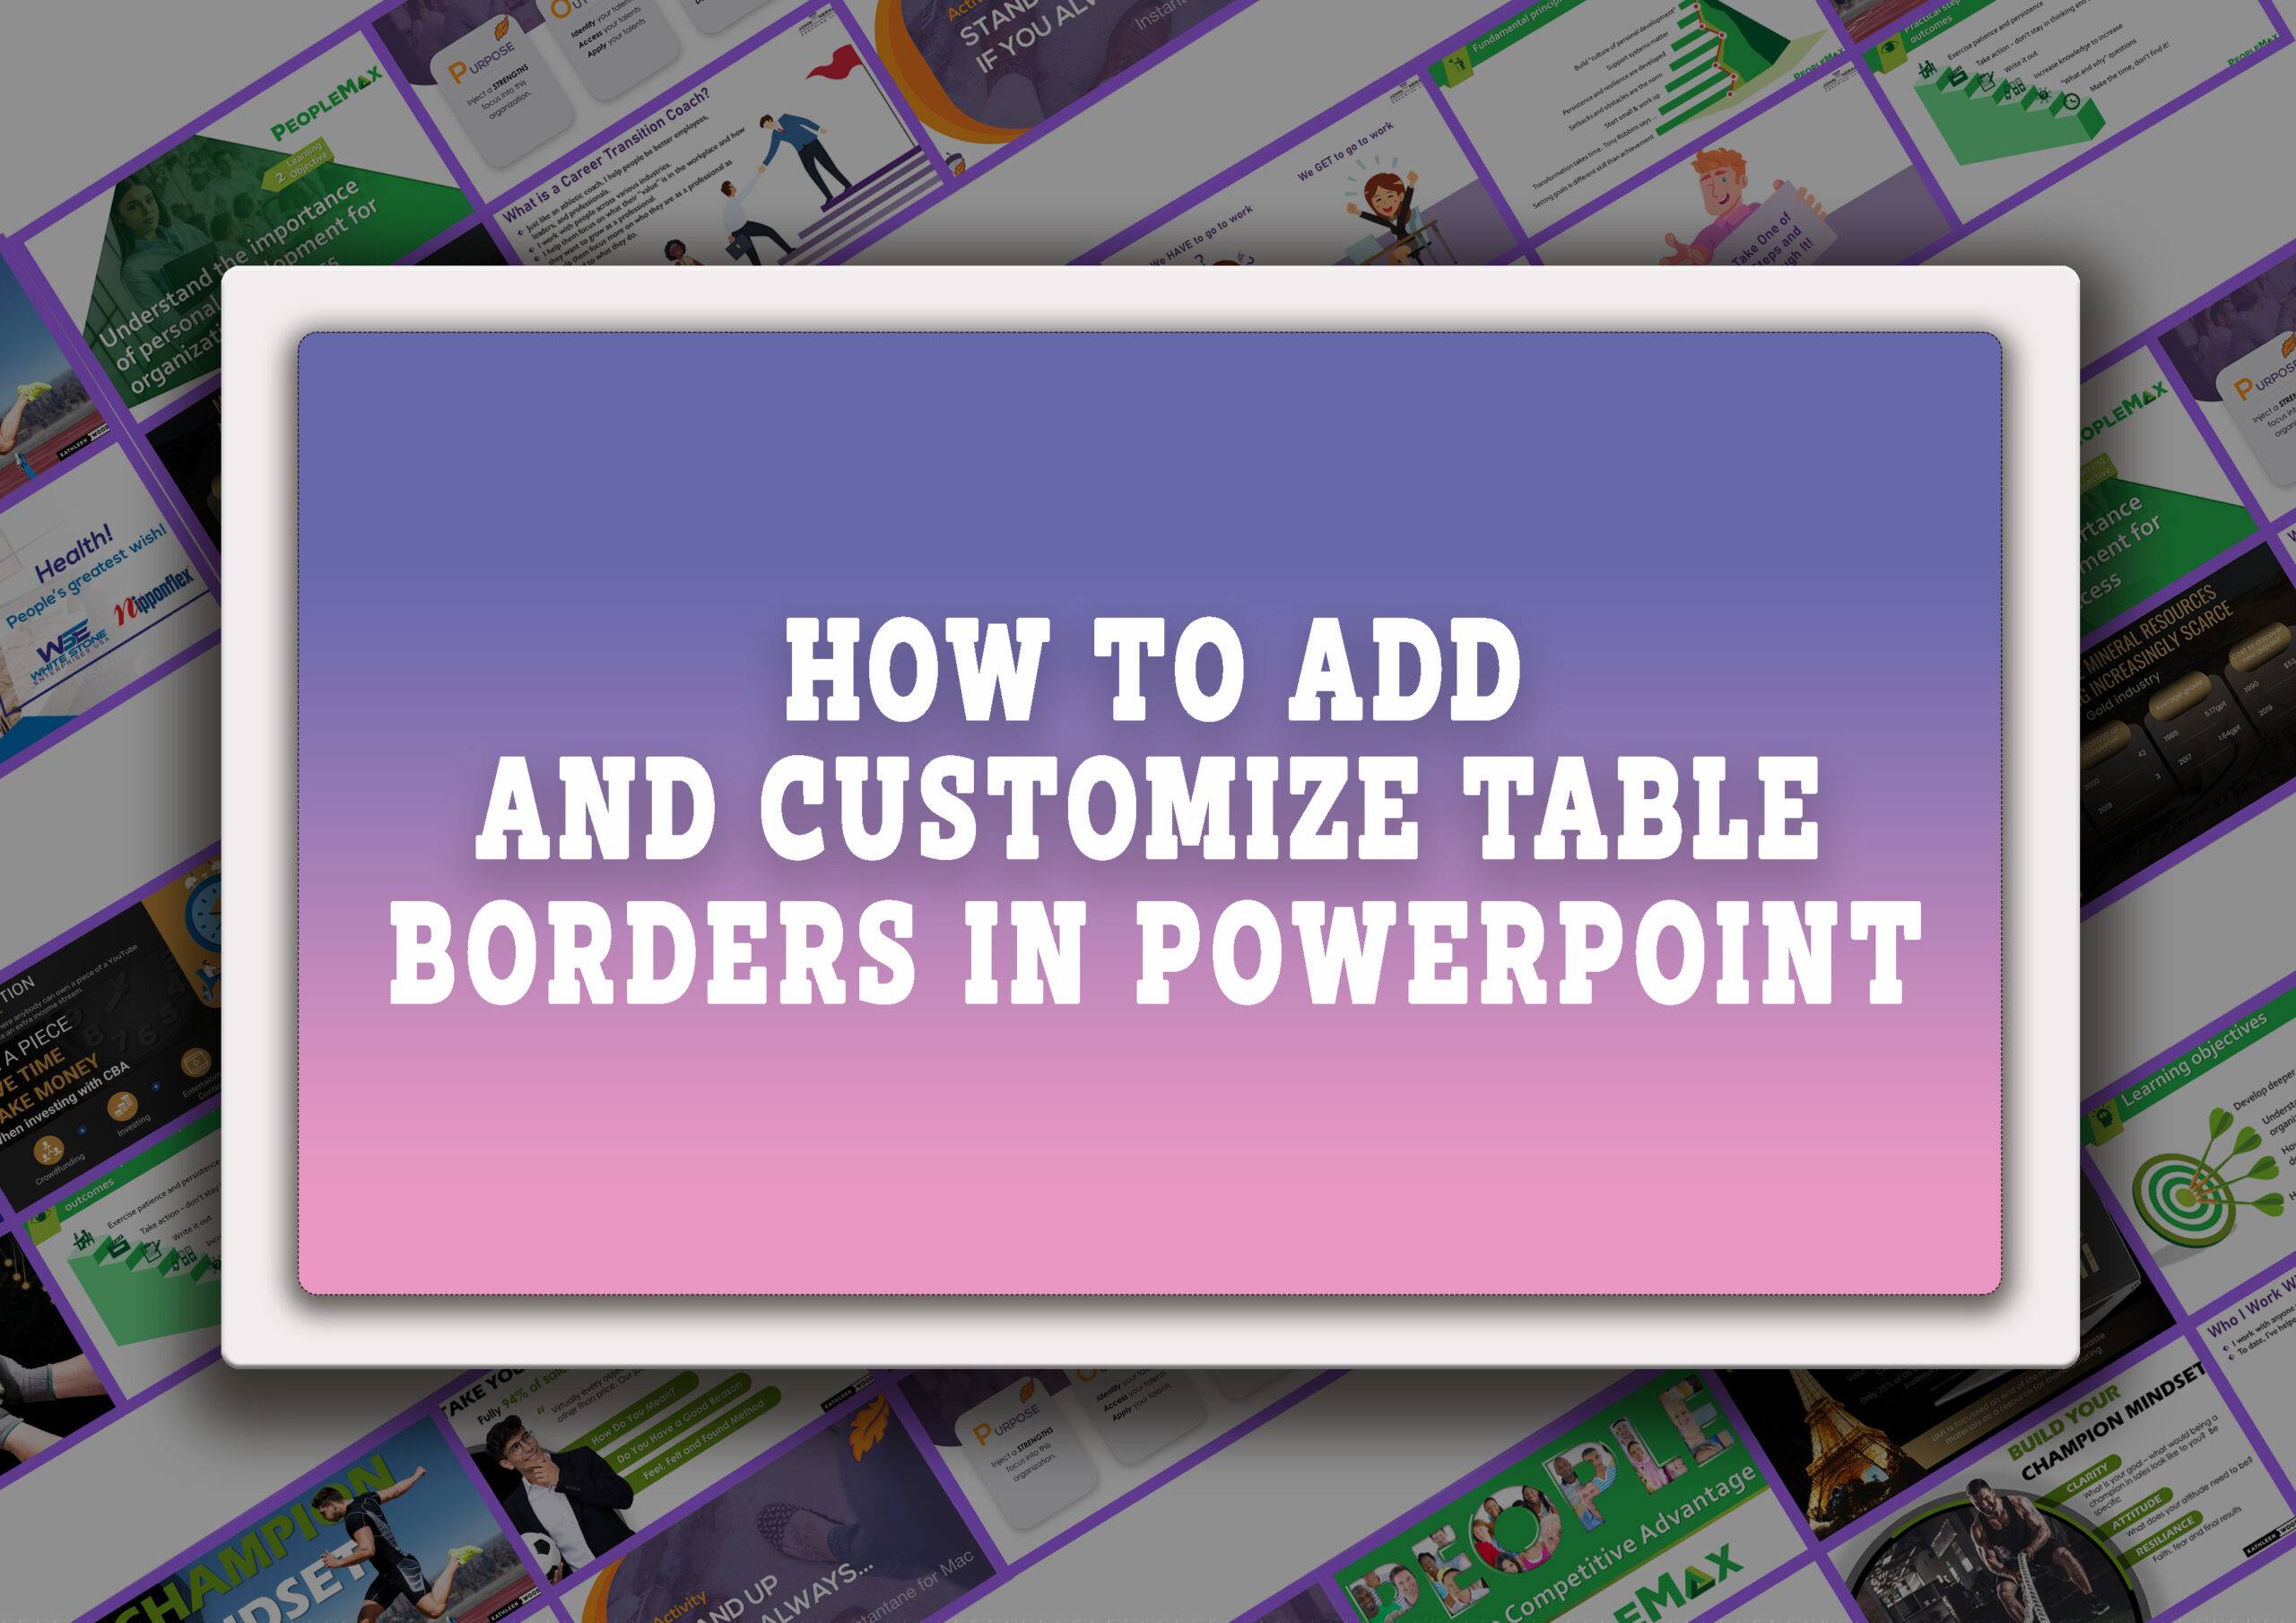 Customizing table borders in PowerPoint